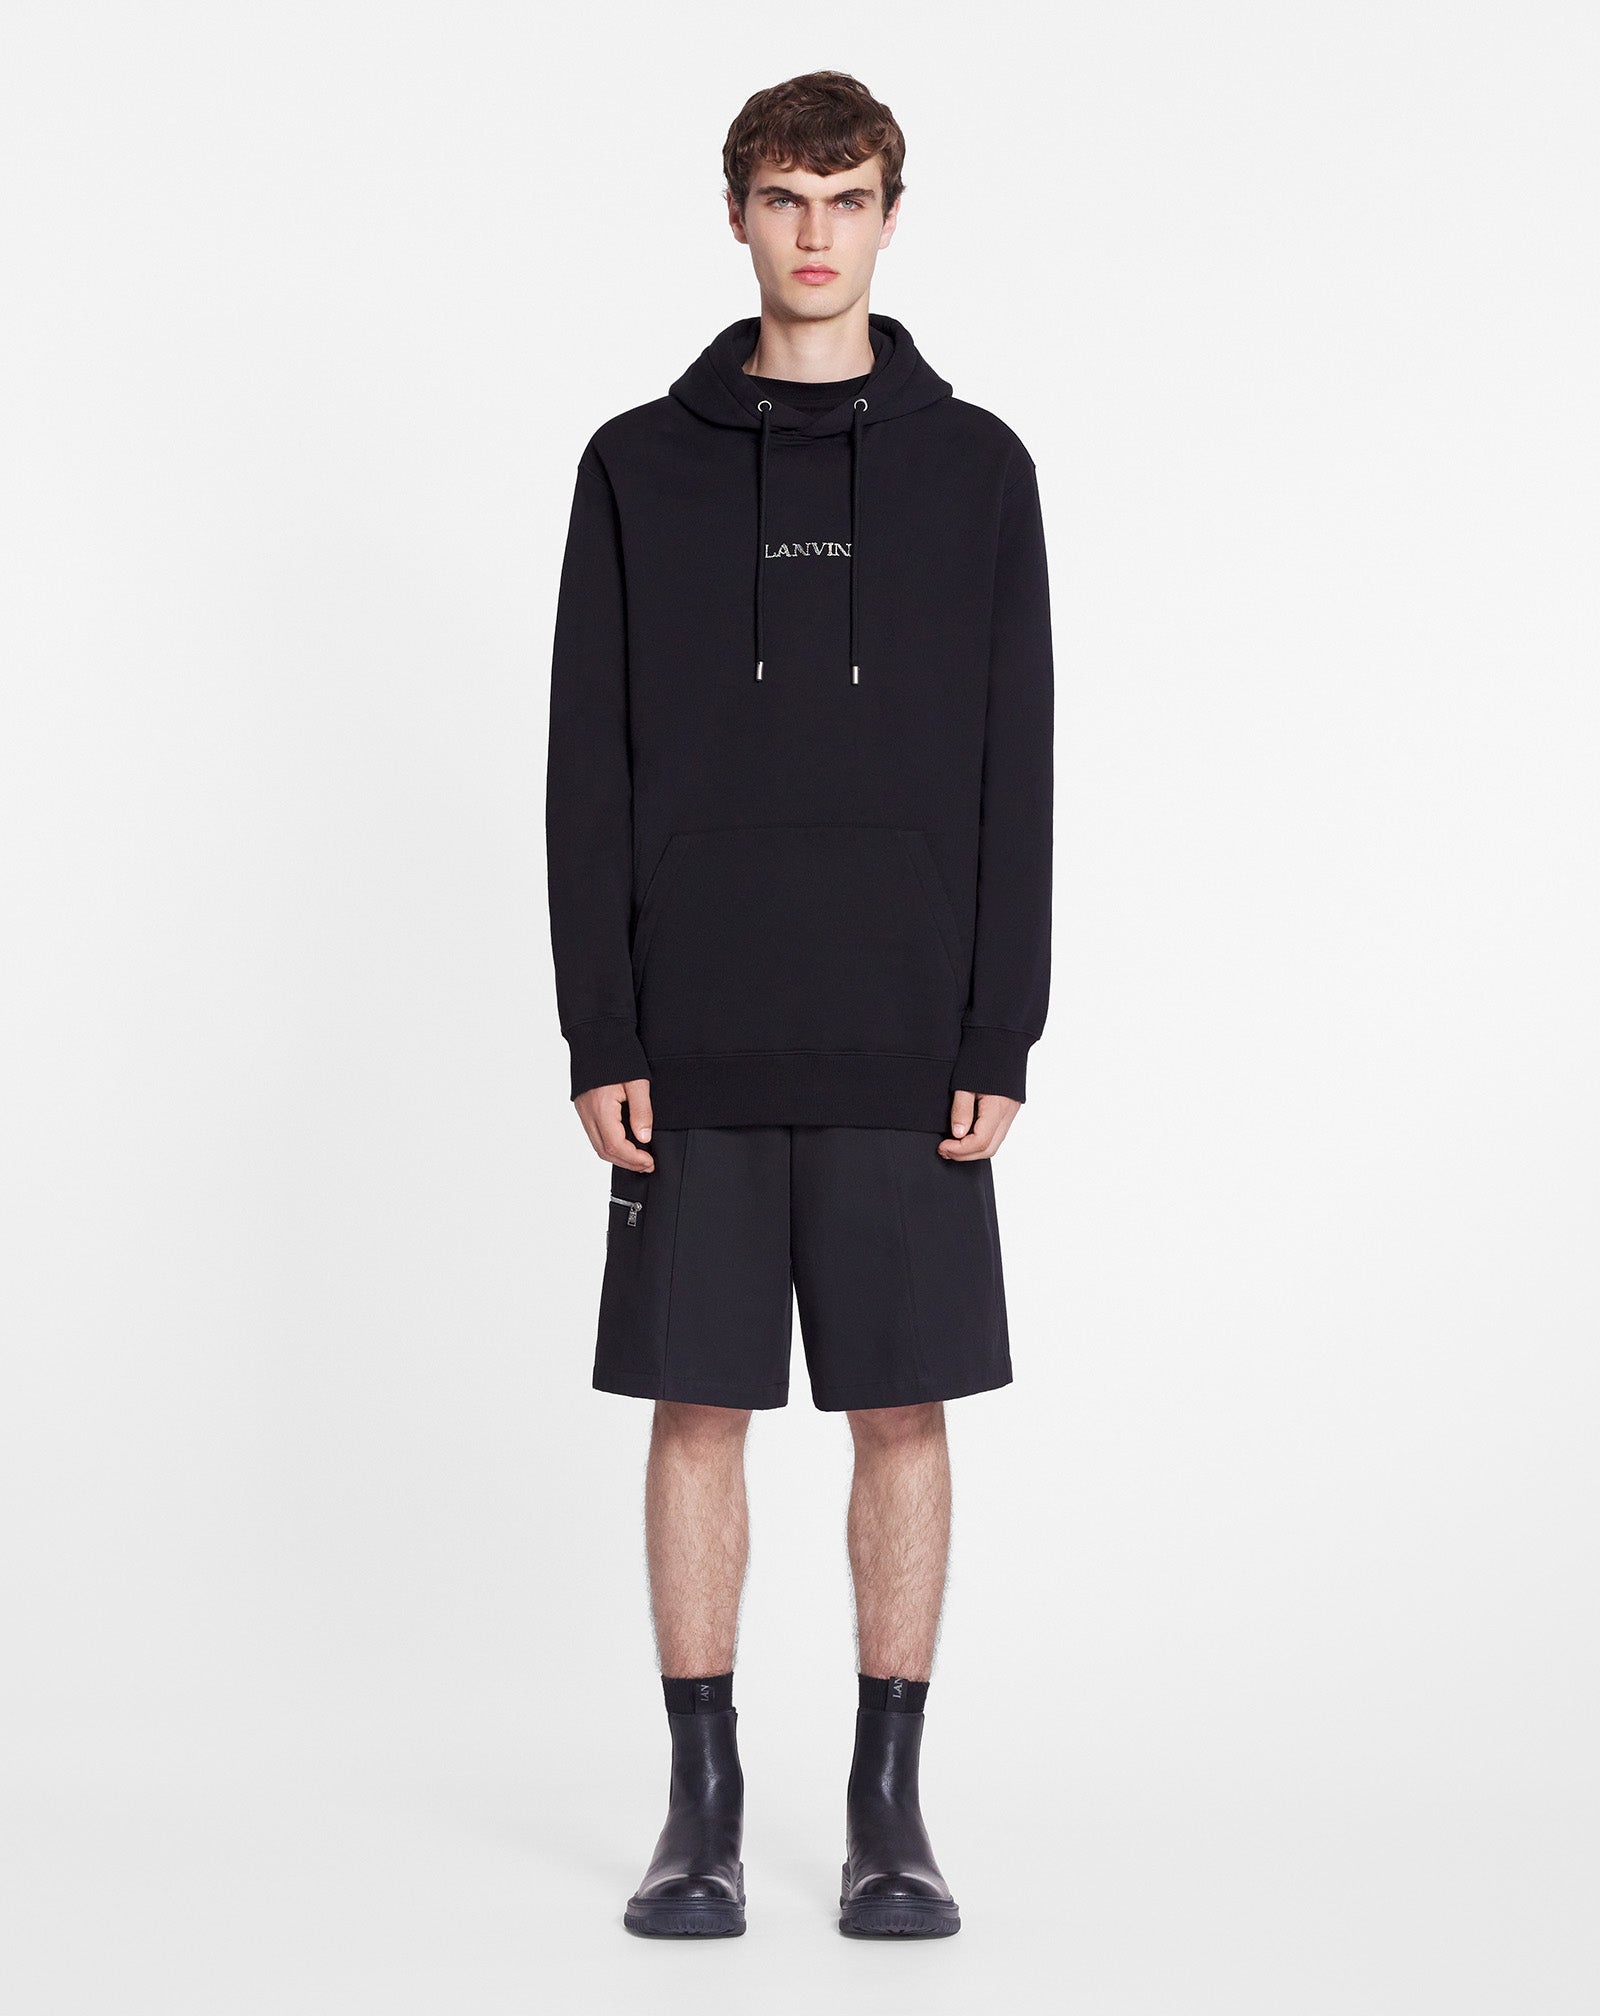 LOOSE-FITTING HOODIE WITH LANVIN LOGO - 2